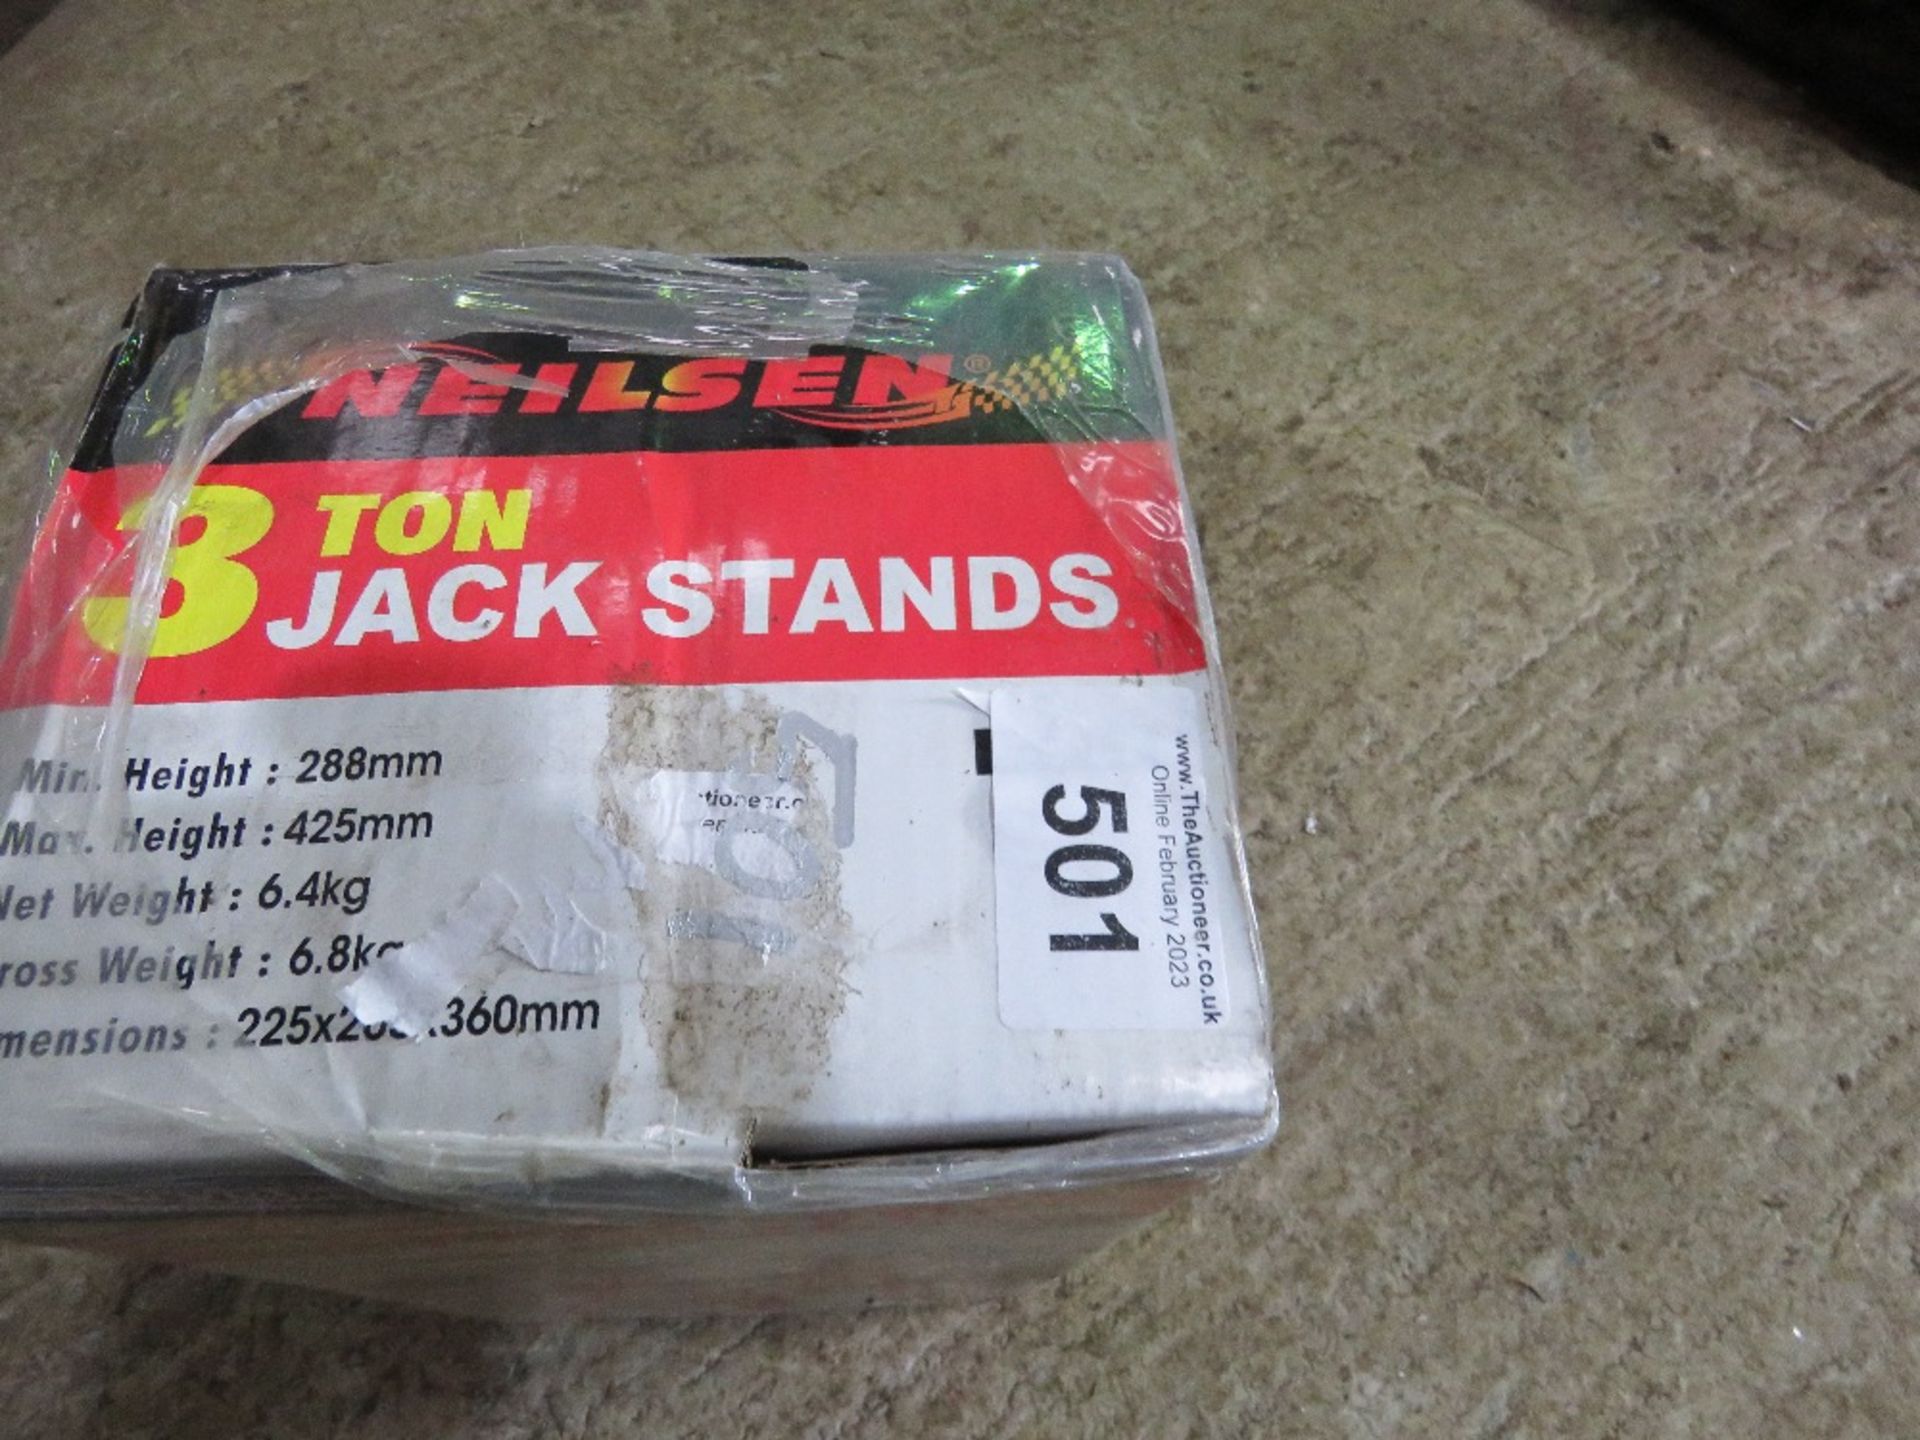 3 TONNE RATED JACK STANDS. - Image 2 of 2